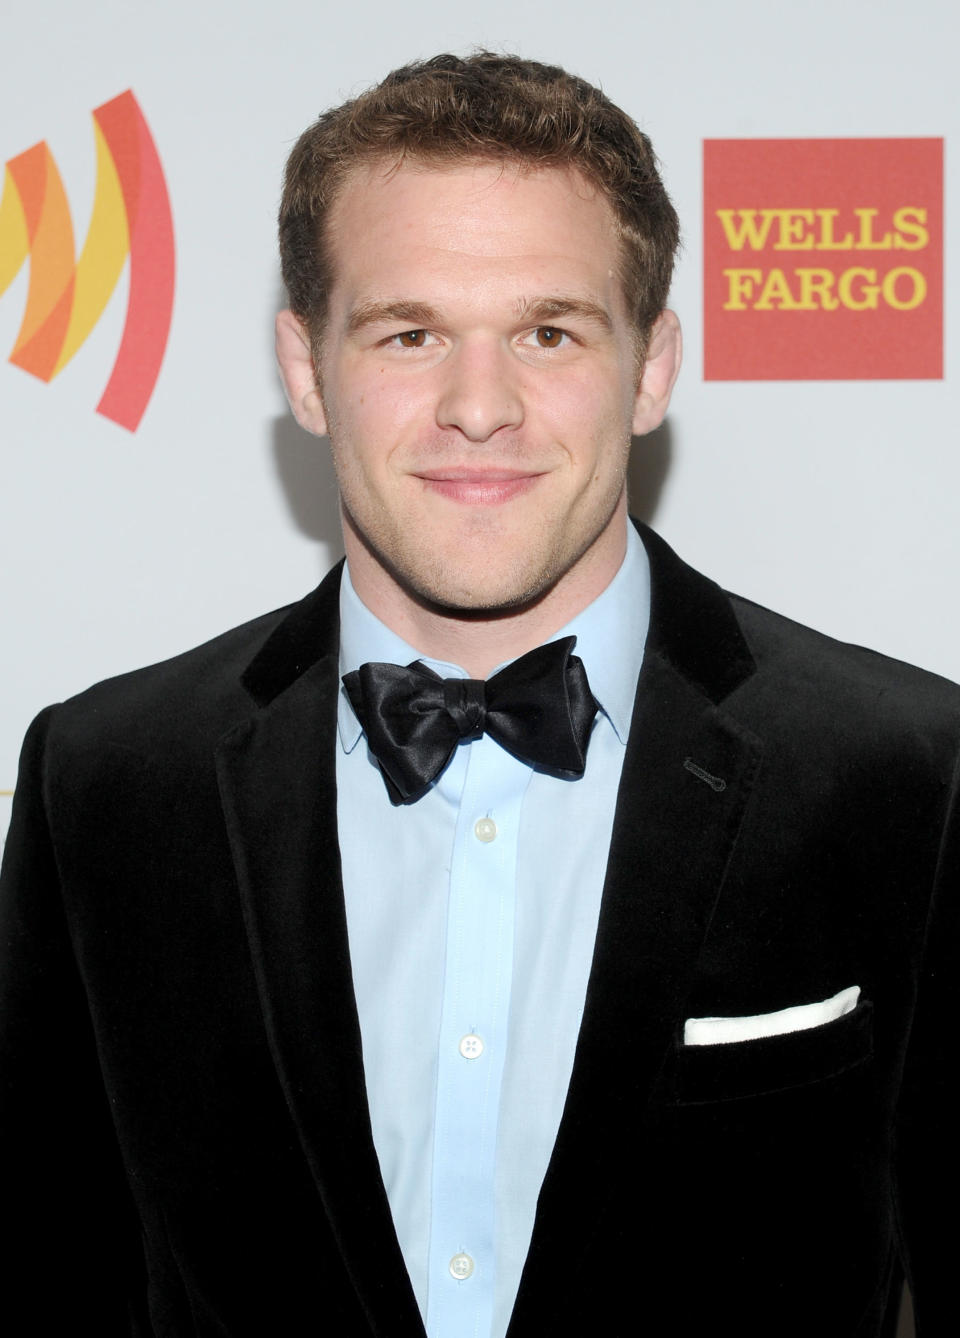 Hudson Taylor, a three-time all-American wrestler from the University of Maryland, <a href="http://www.advocate.com/sports/2012/09/06/hudson-taylor-takes-his-training-road"> (and HuffPost Gay Voices <a href="http://www.huffingtonpost.com/hudson-taylor/">blogger</a>) started his foundation, Athlete Ally</a>, which encourages “all individuals involved in sports to respect every member of their communities, regardless of perceived or actual sexual orientation, gender identity or gender expression,” in January 2011.   Athlete Ally teamed up with GLAAD and they recently announced that the NBA is the first major sports league that will receive sensitivity training from Taylor’s organization.  